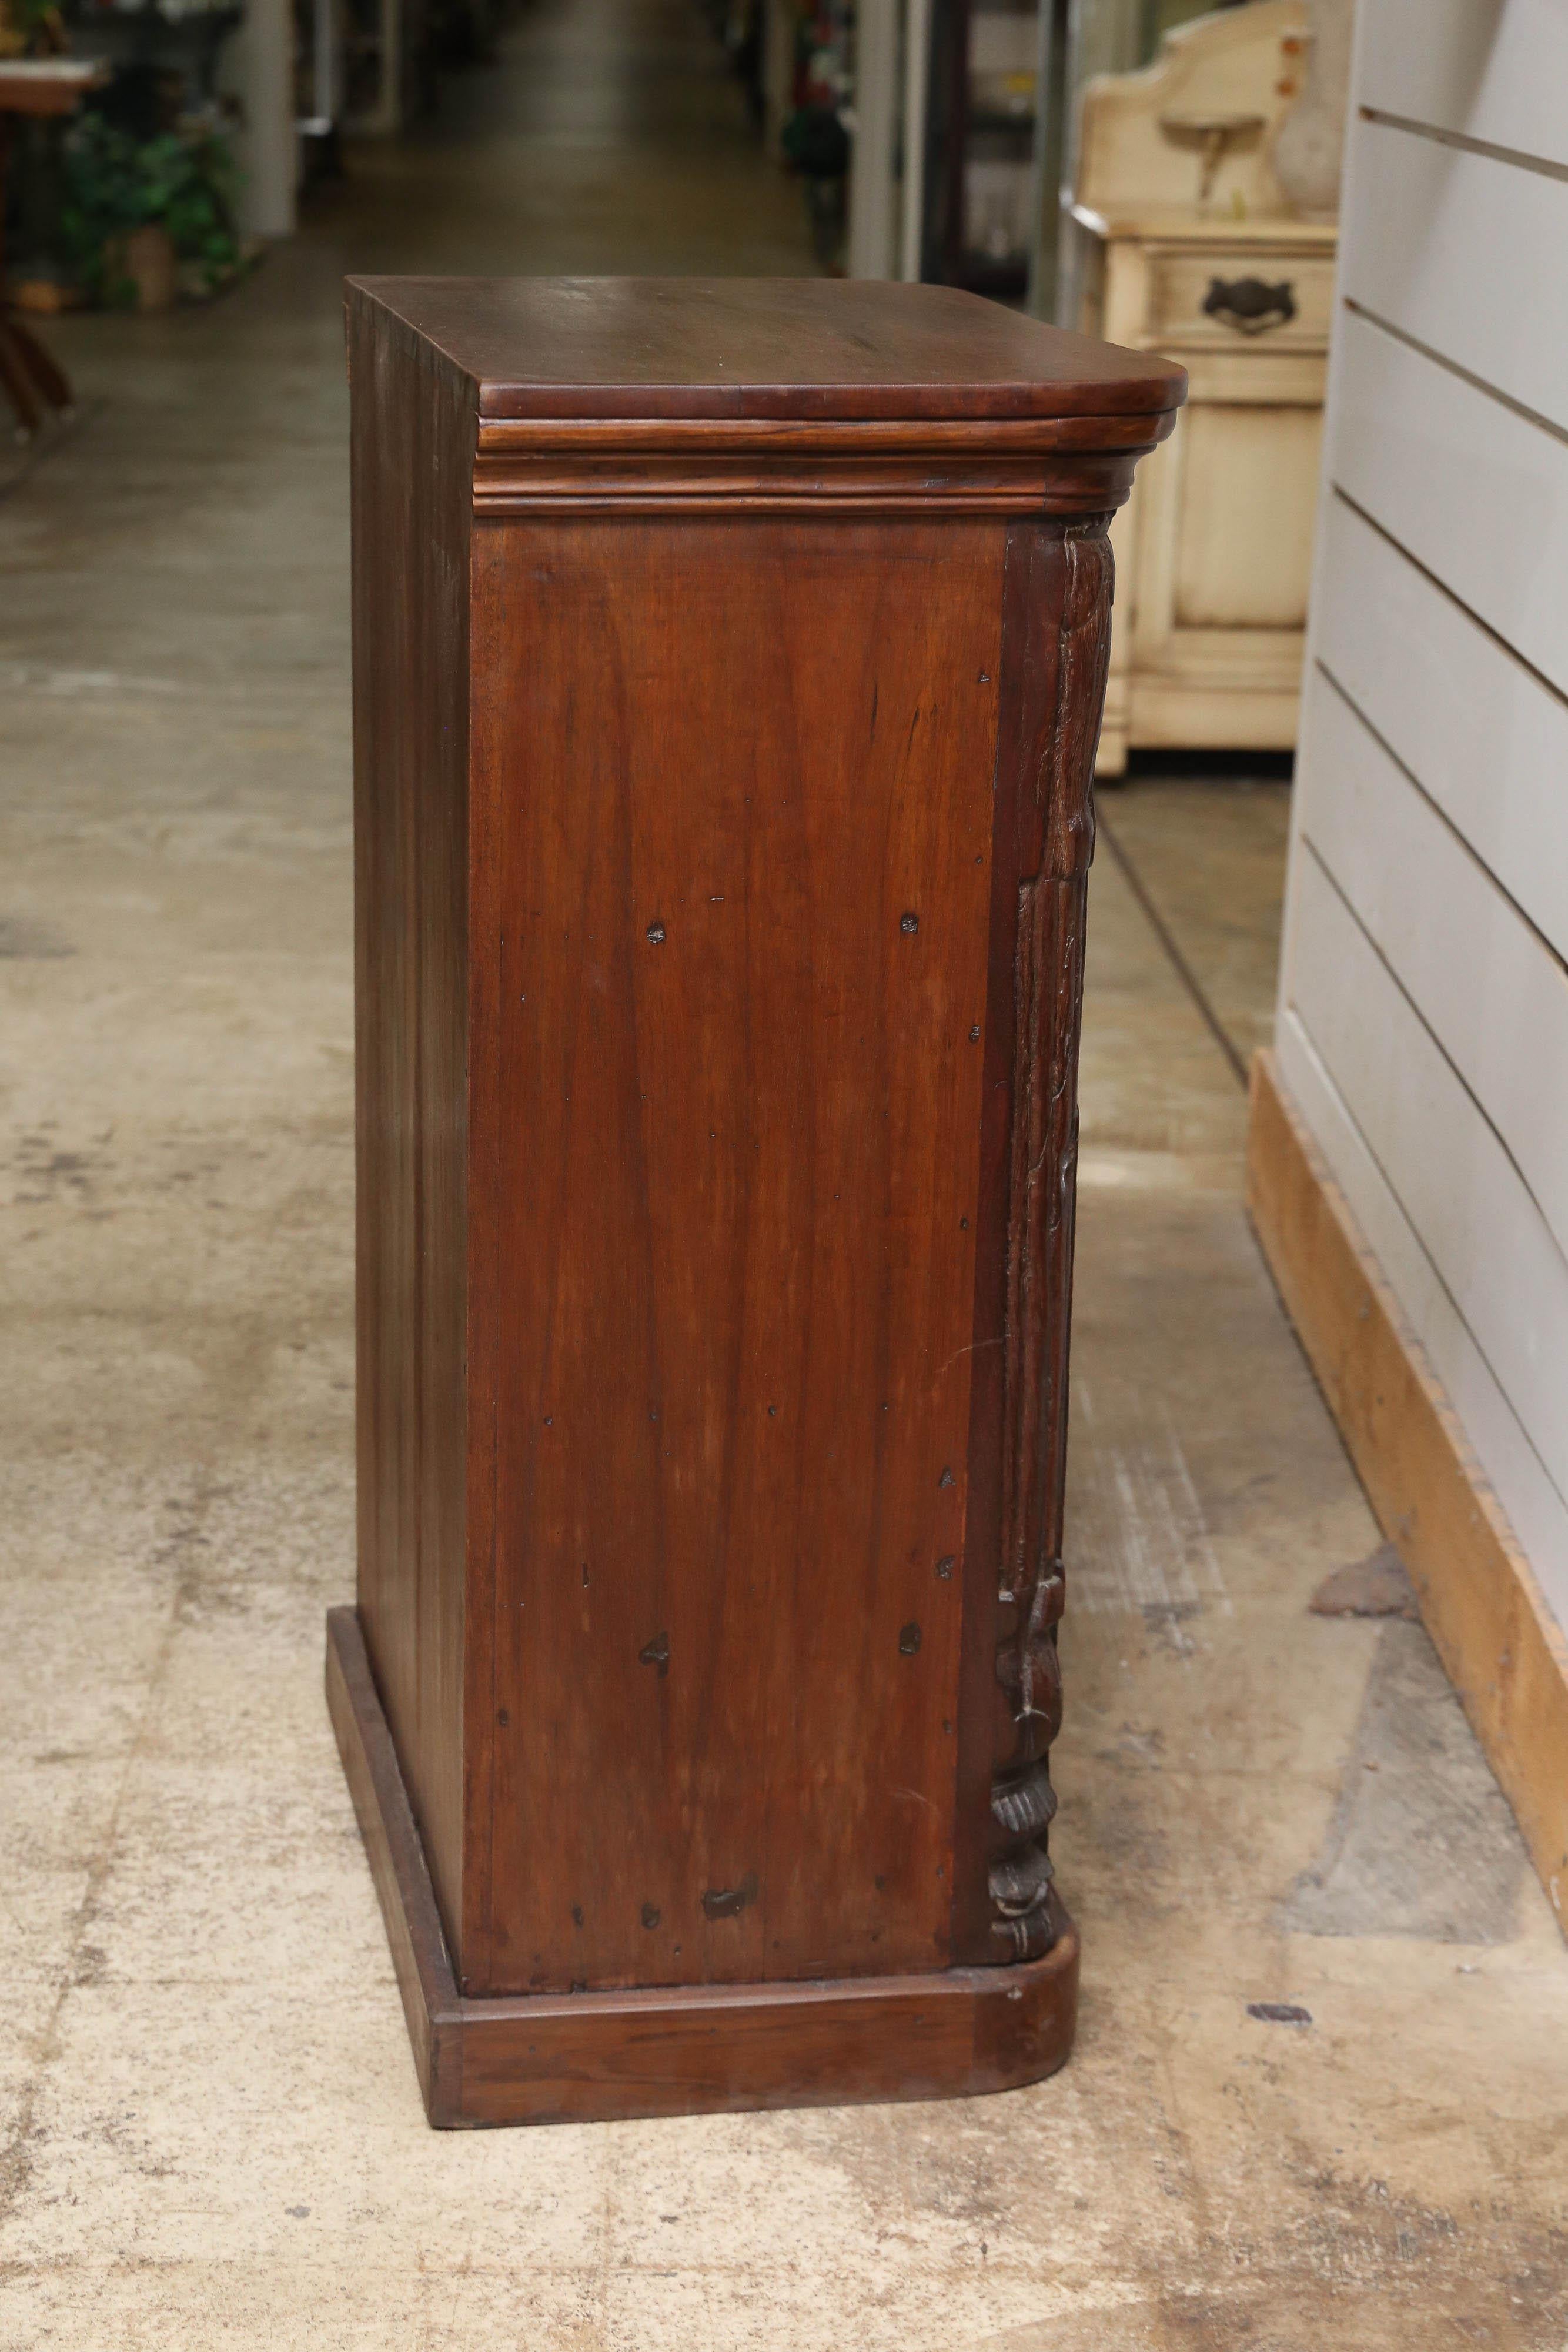 Pair of Highly Decorative Solid Teak Wood Nightstands from Plantation Homes 1